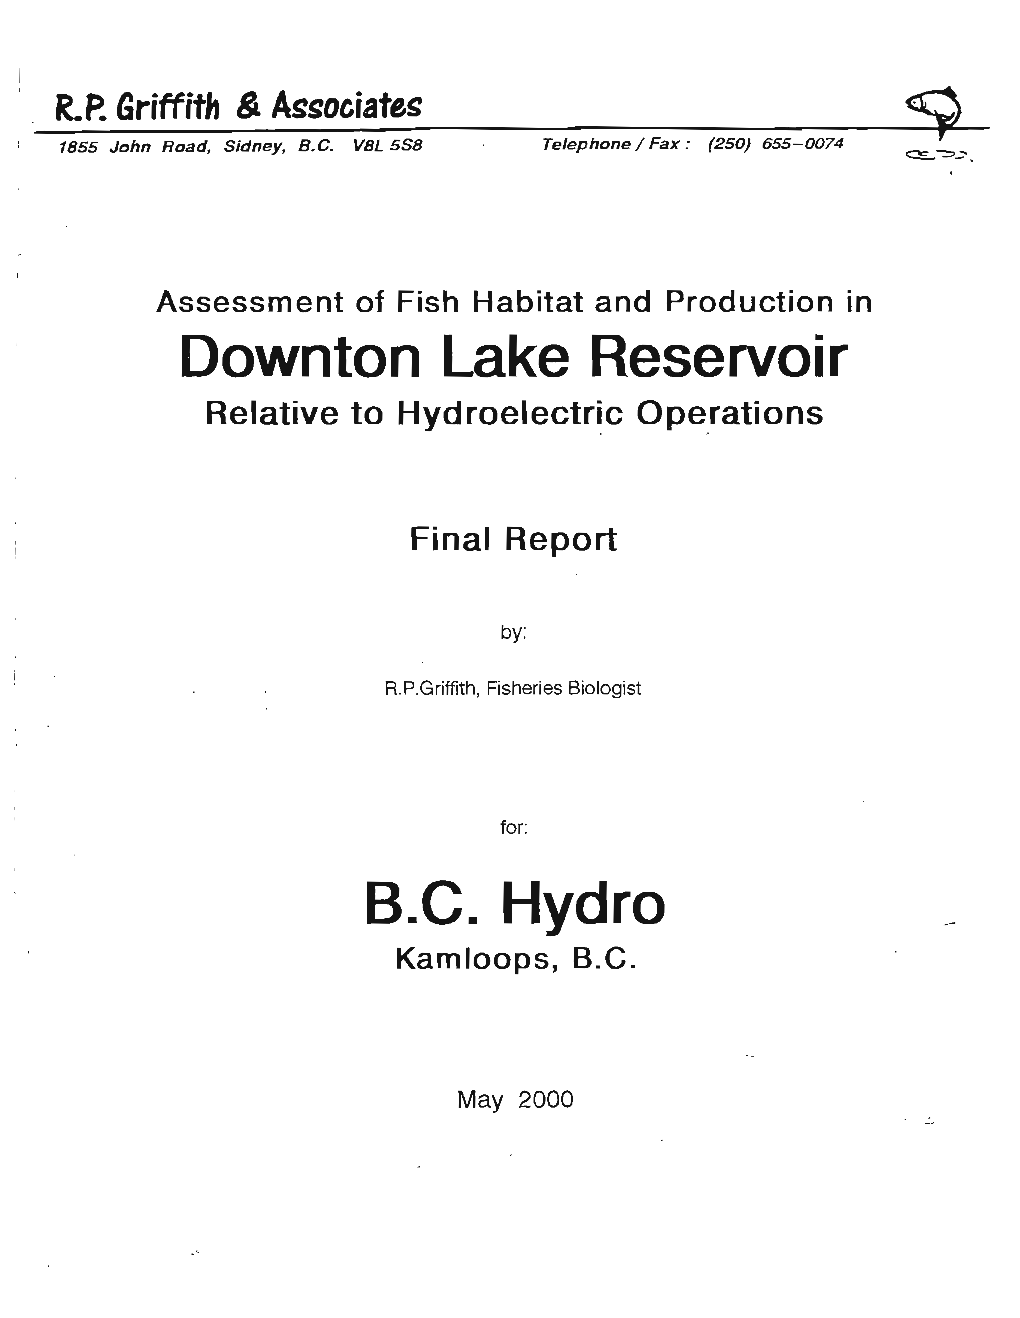 Assessment of Fish Habitat and Production in Downton Lake